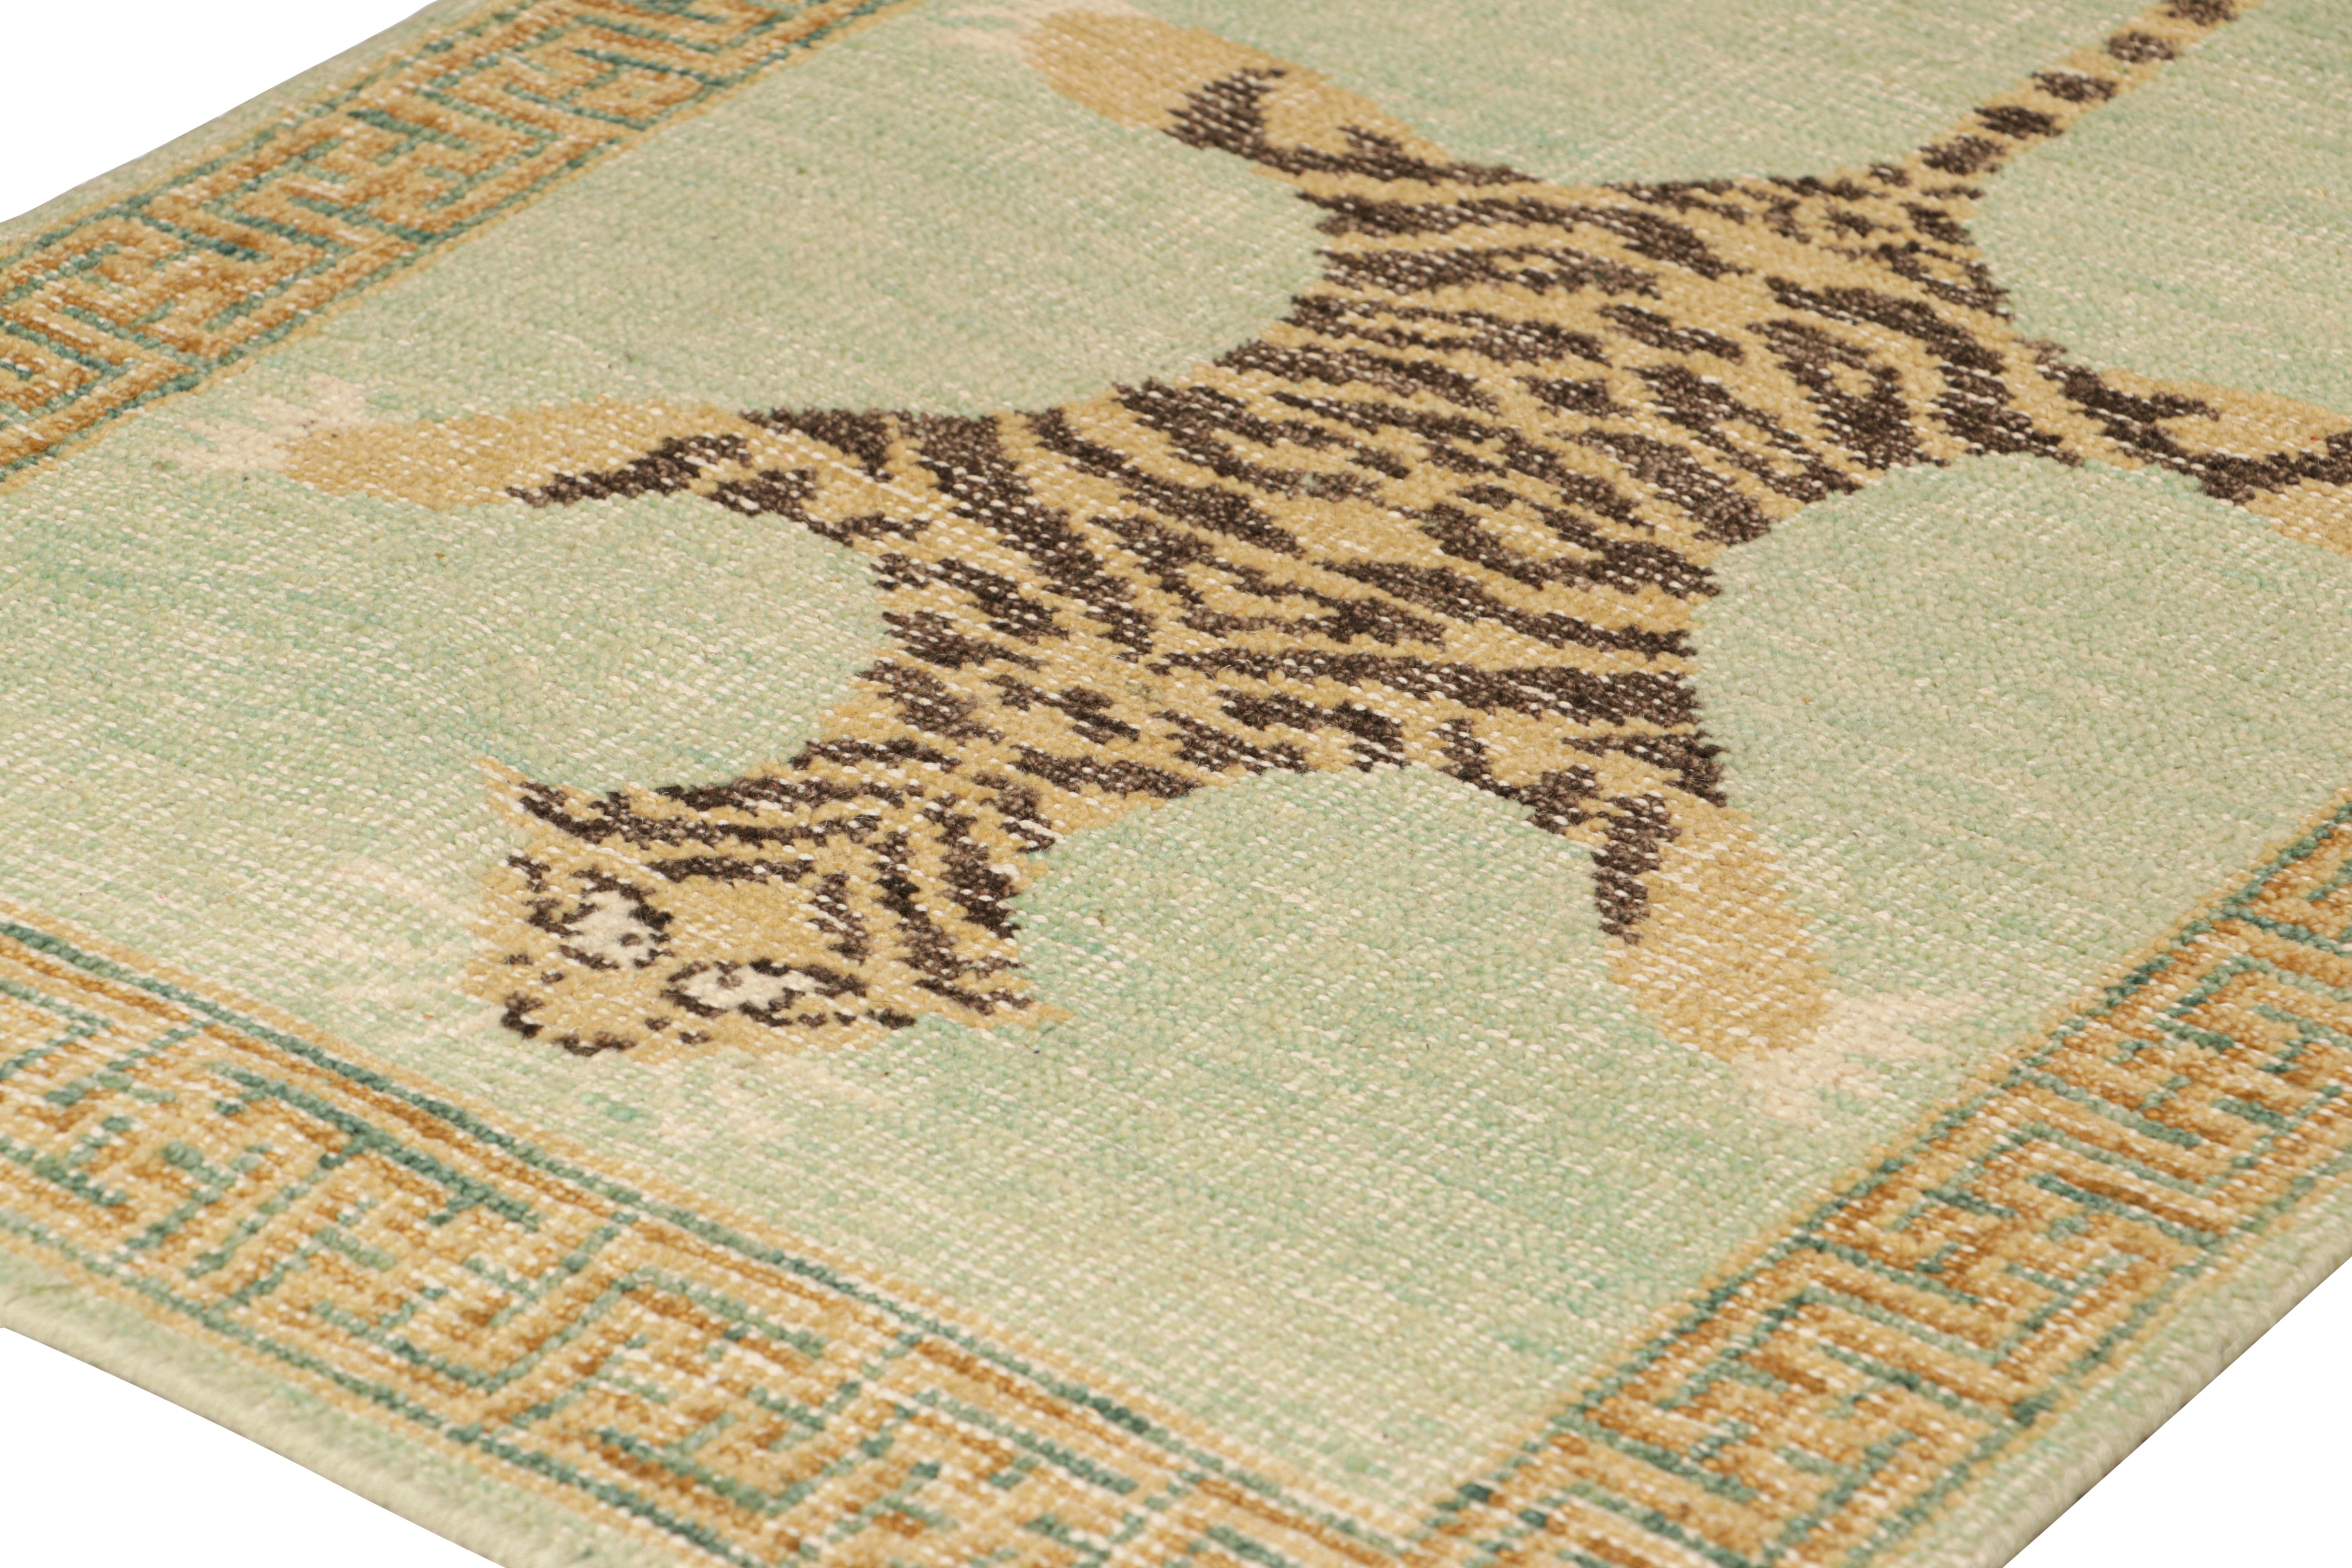 Hand-knotted in wool, this 2x3 modern tiger pictorial rug features a vibrant colorway of green, beige and black tones. 

On the Design: 

Hand-knotted in wool pile, a contemporary rug as inspired by classic antique Indian tiger styles—from our